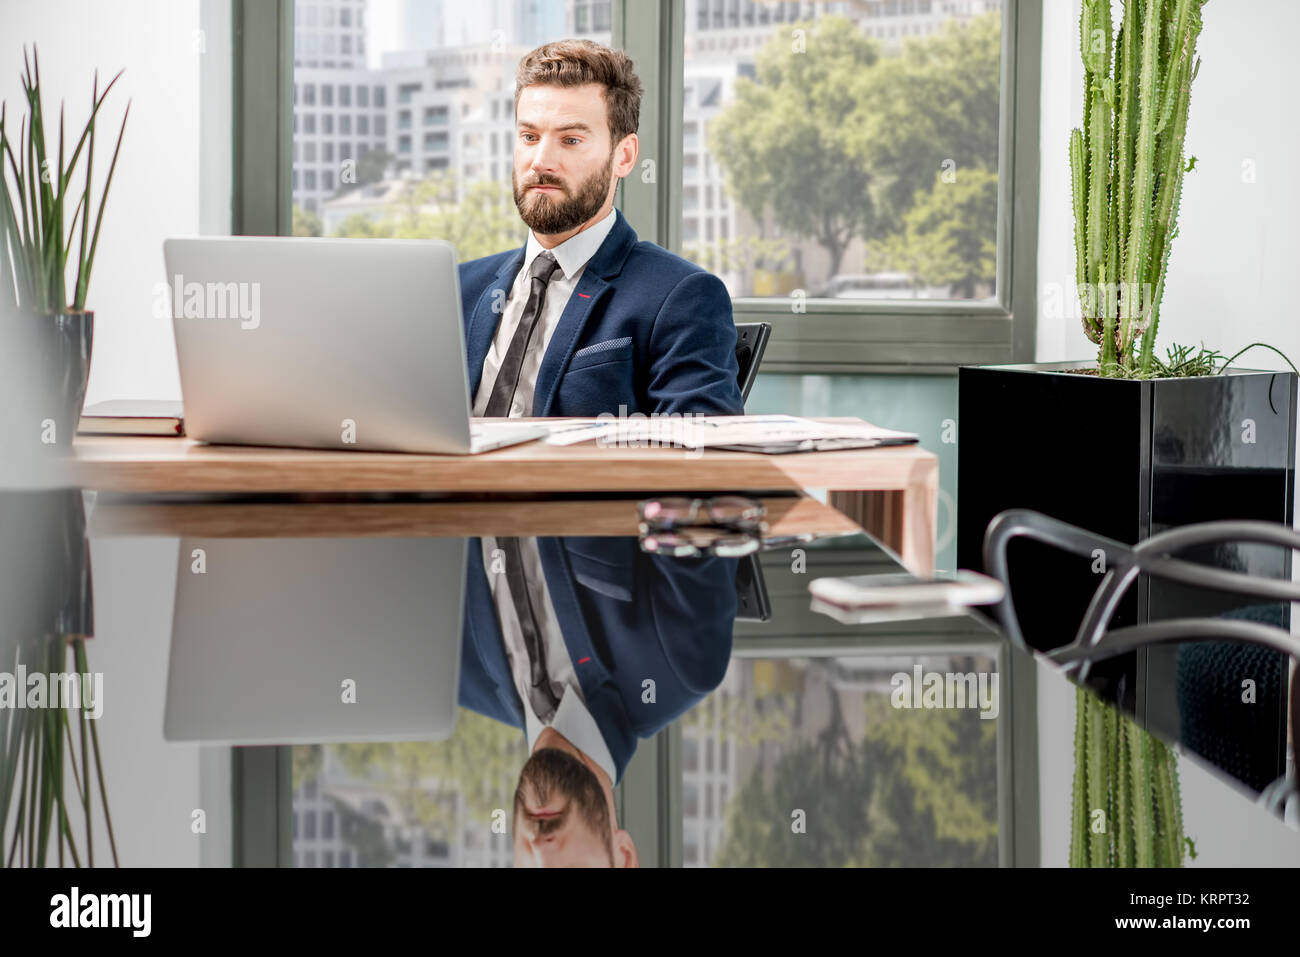 Banker working at the office Stock Photo